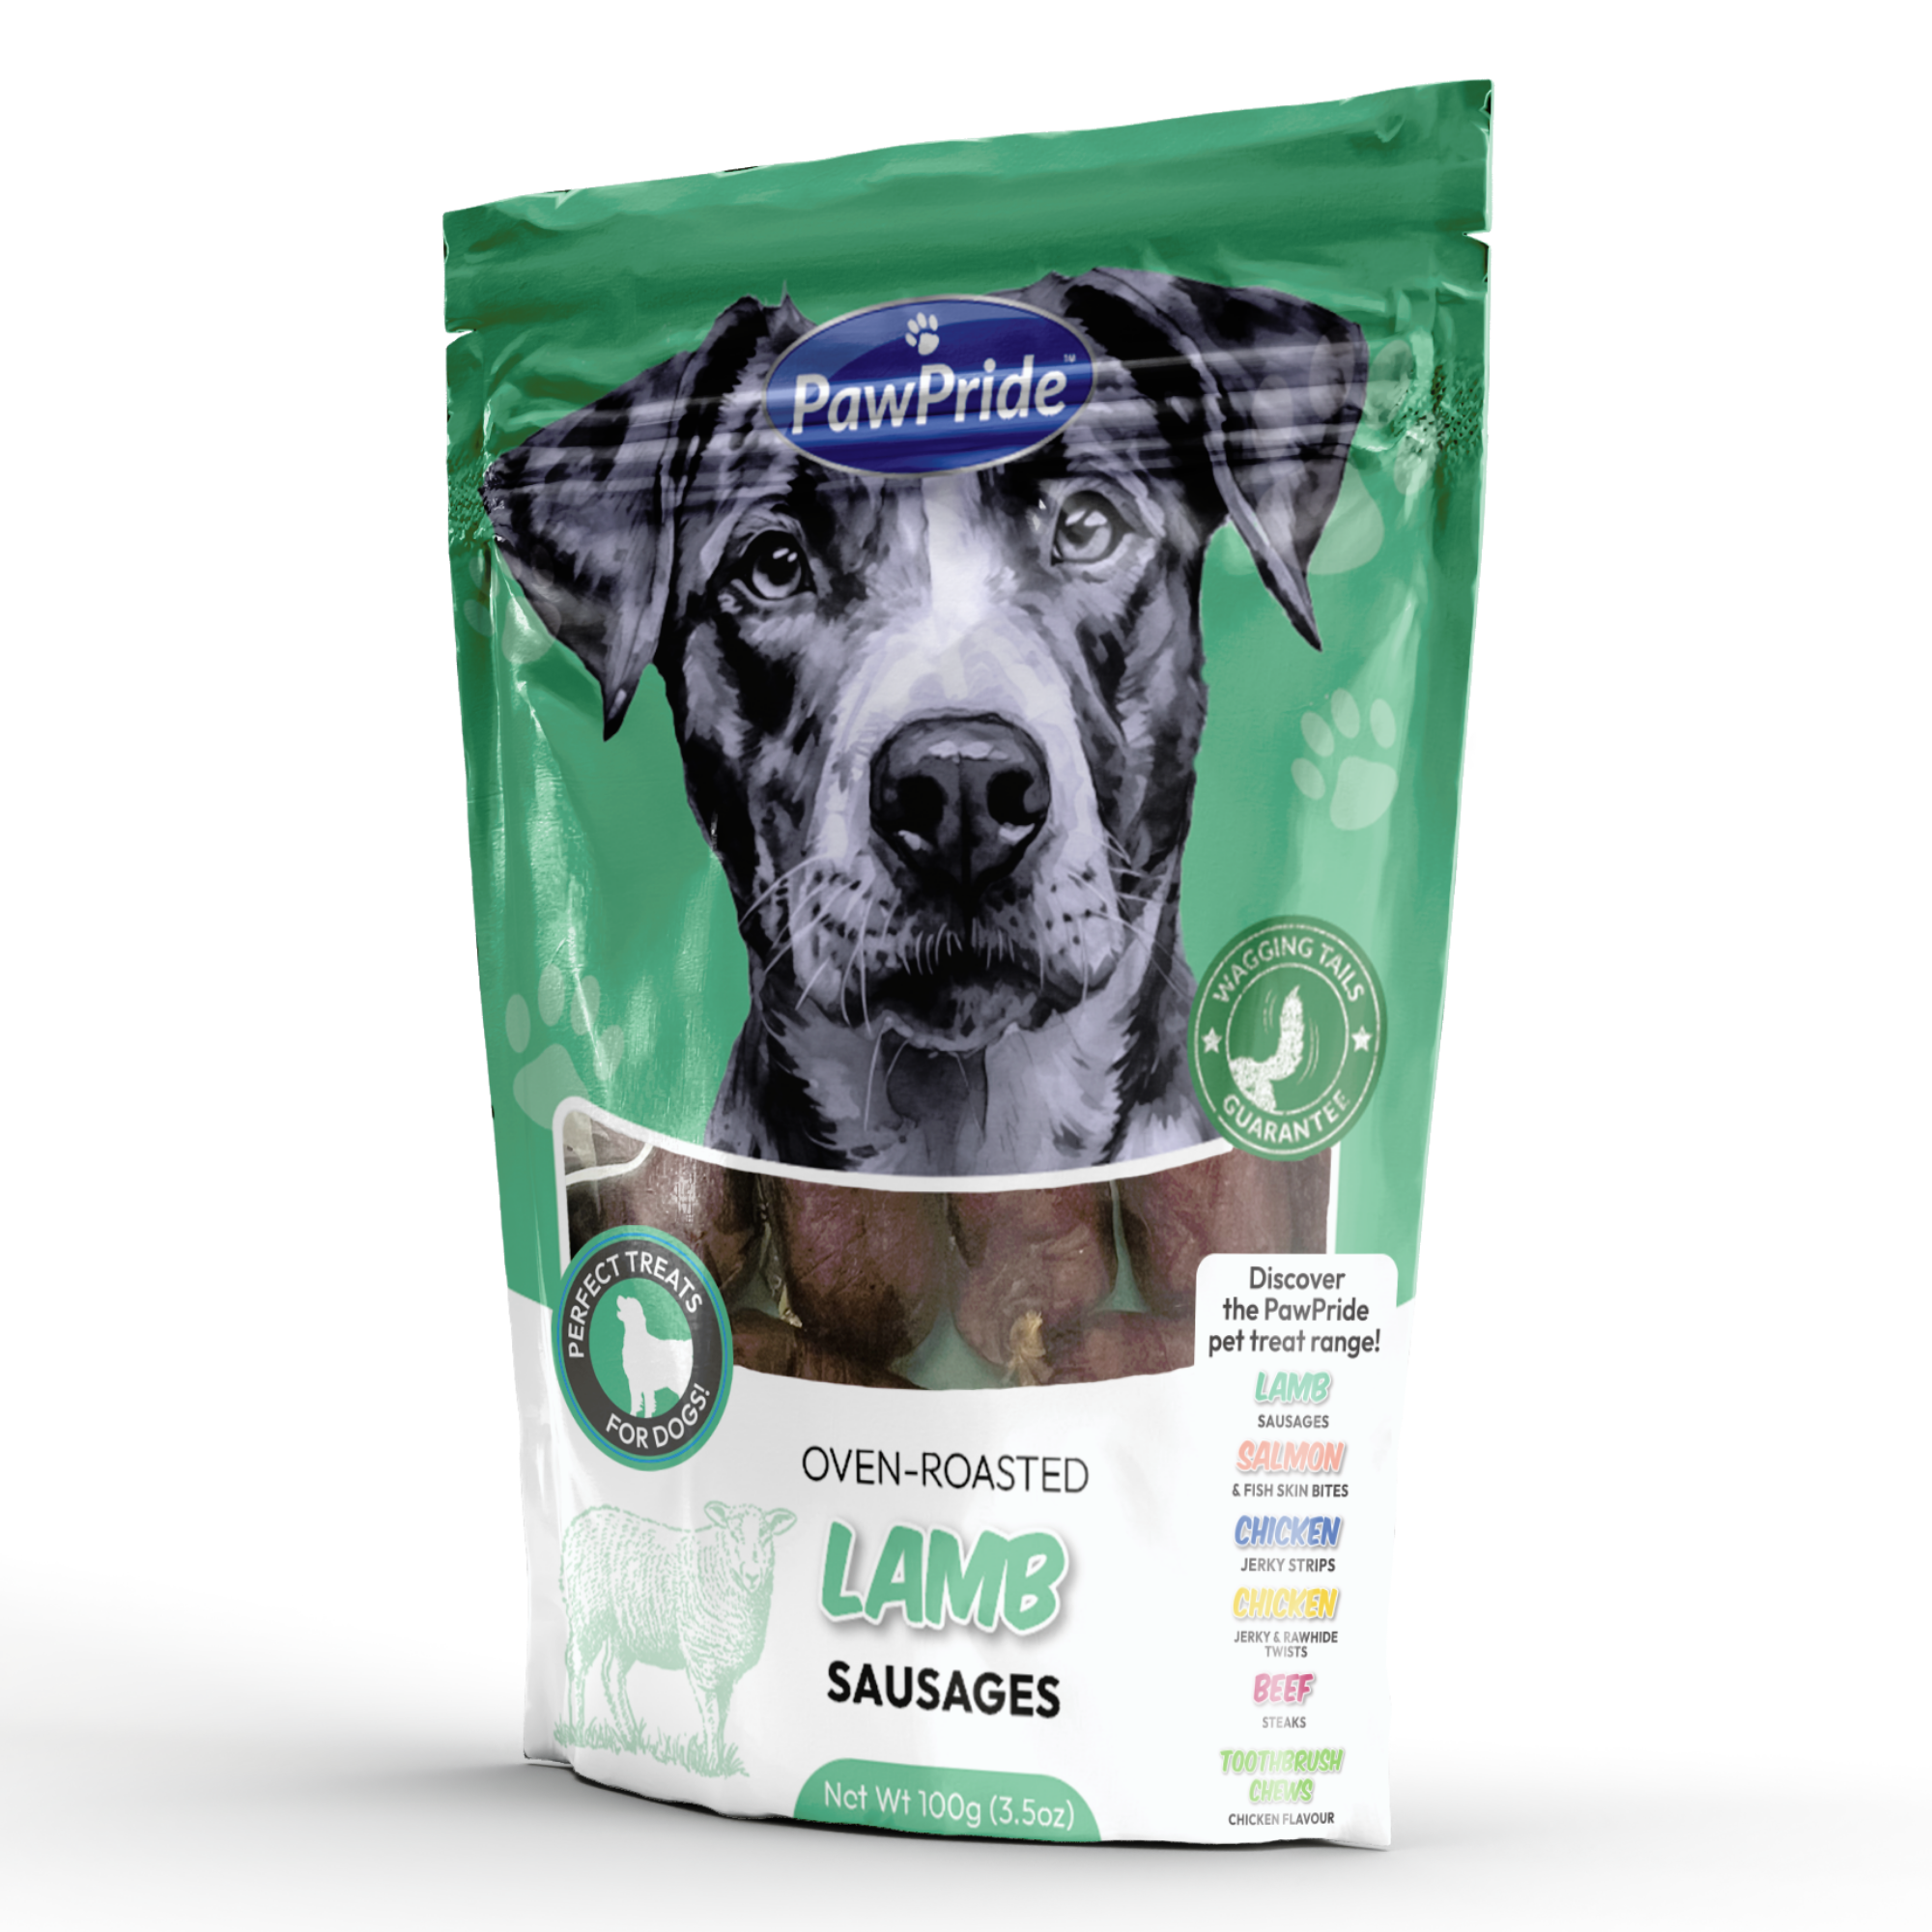 Lamb Sausages - Dog Treats from PawPride